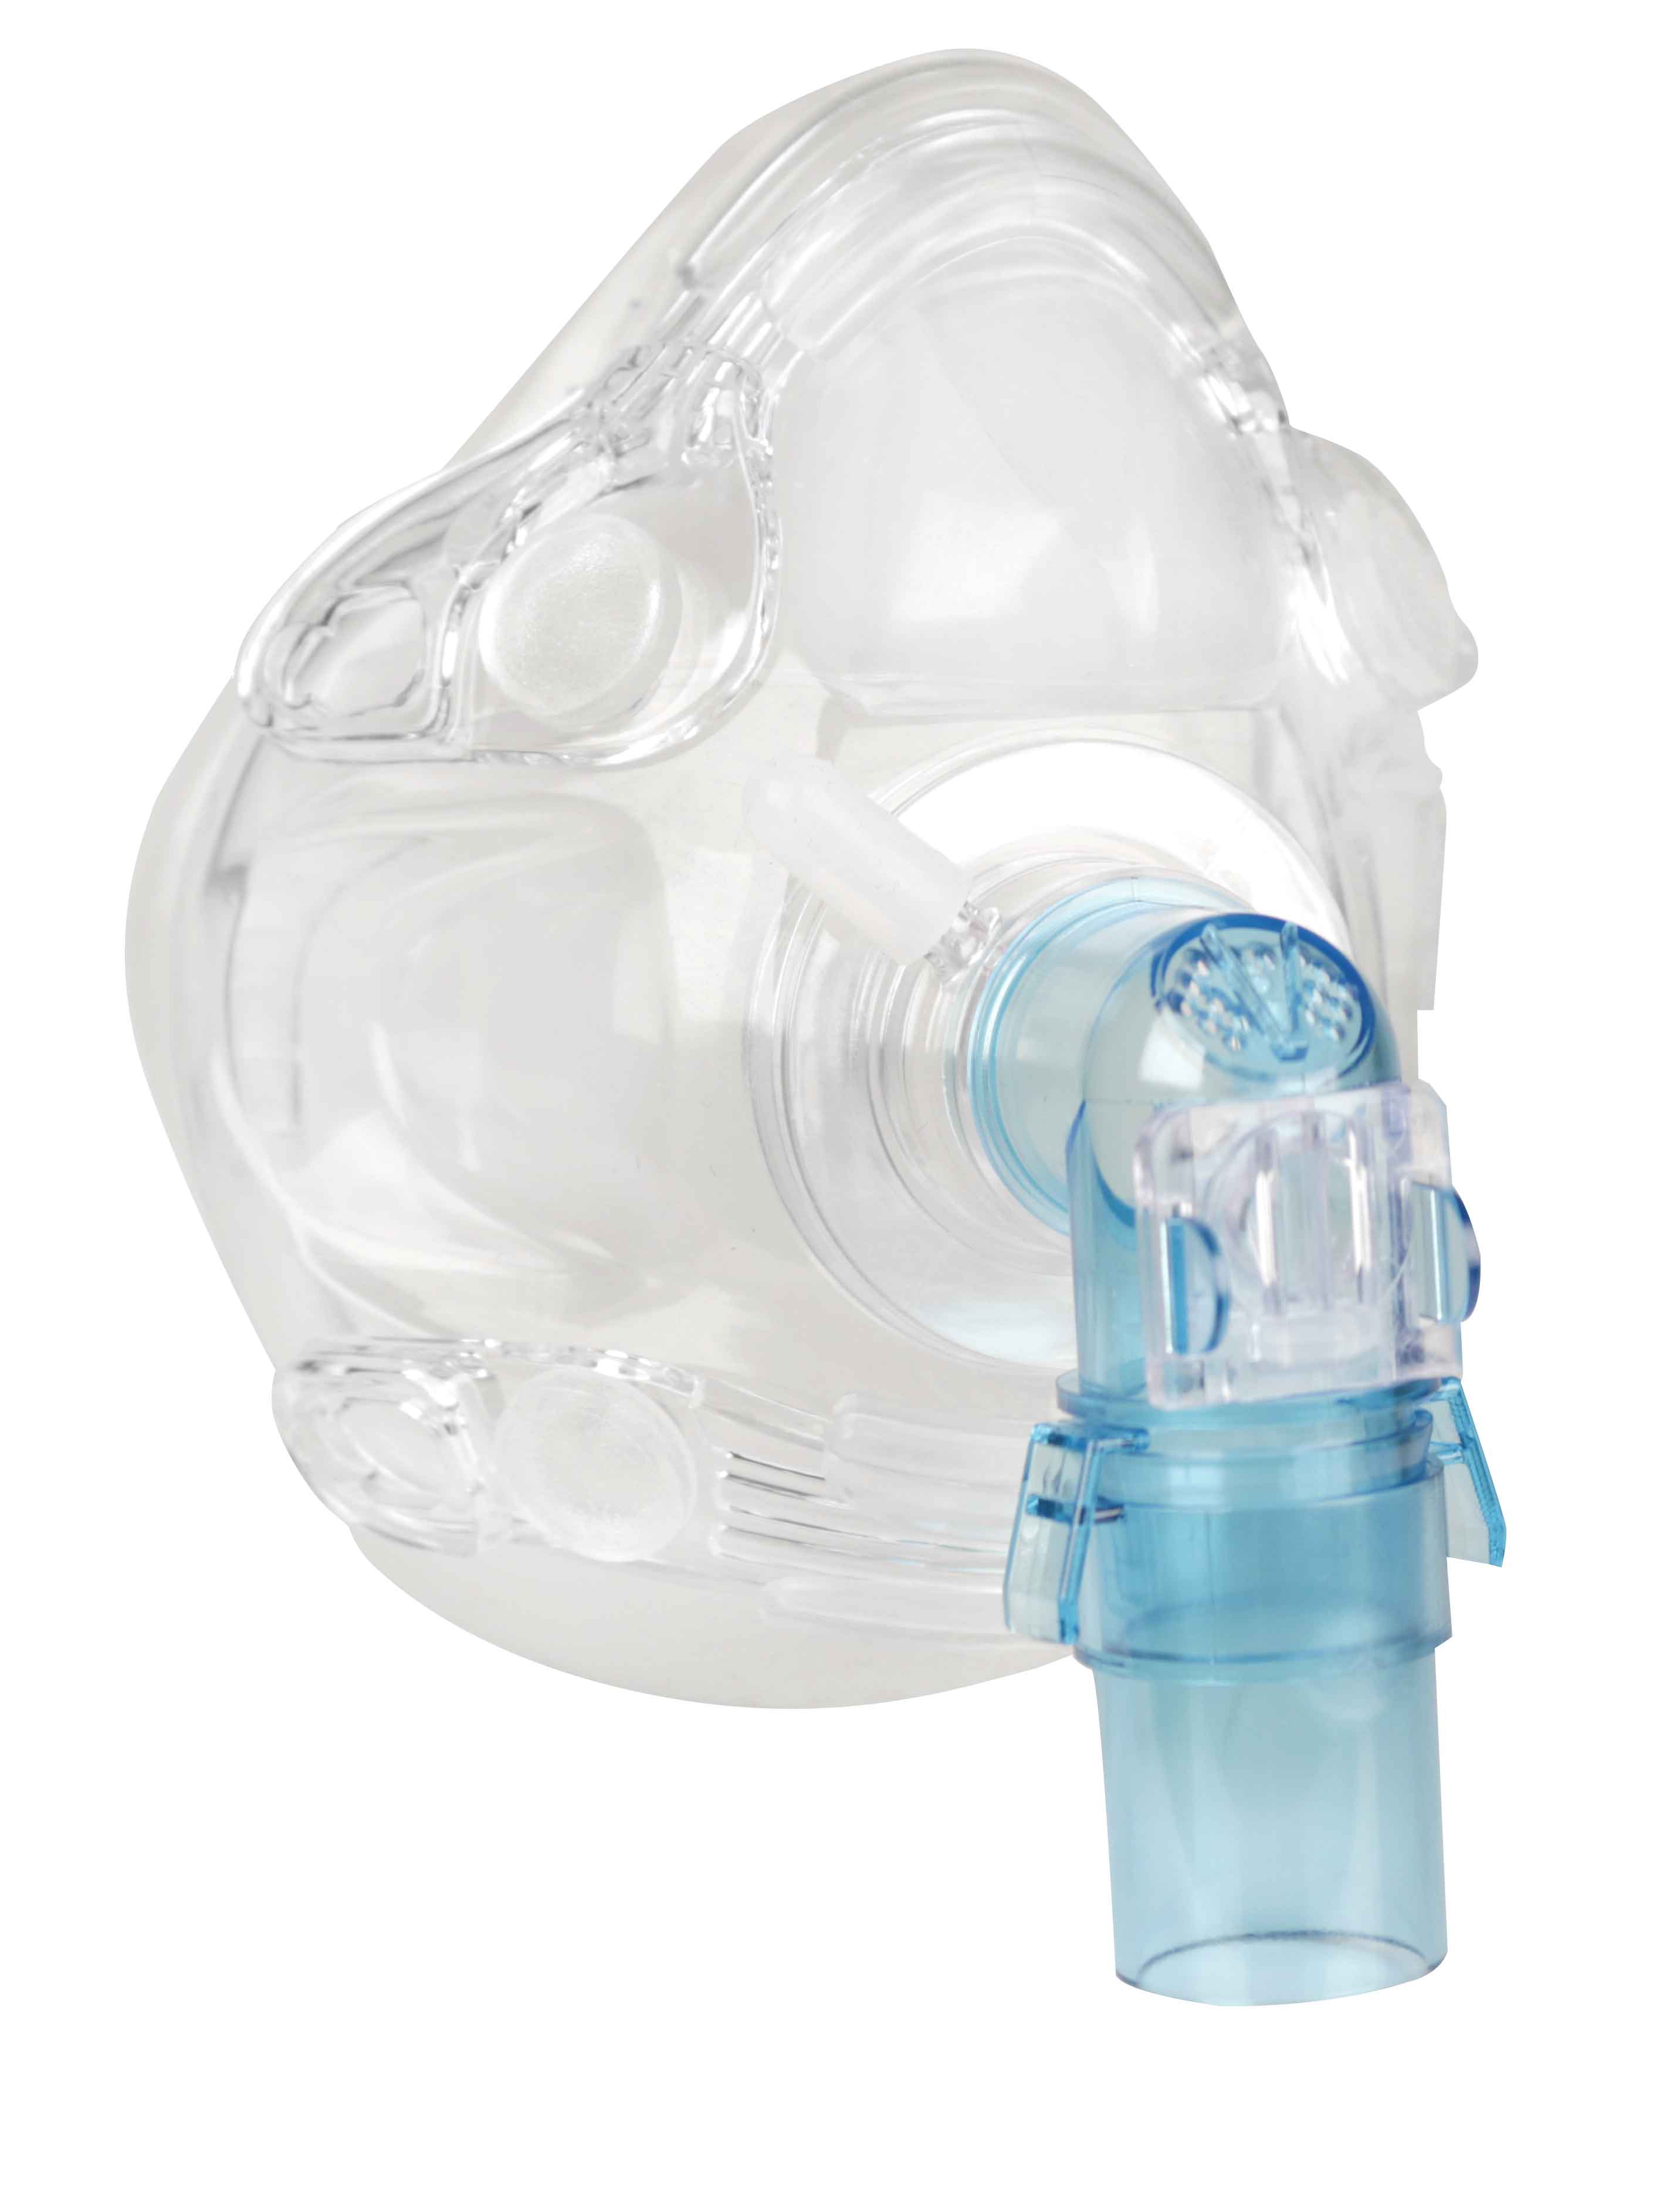 Hans Rudolph Quest Full Face CPAP Mask with Headgear | CPAP.com